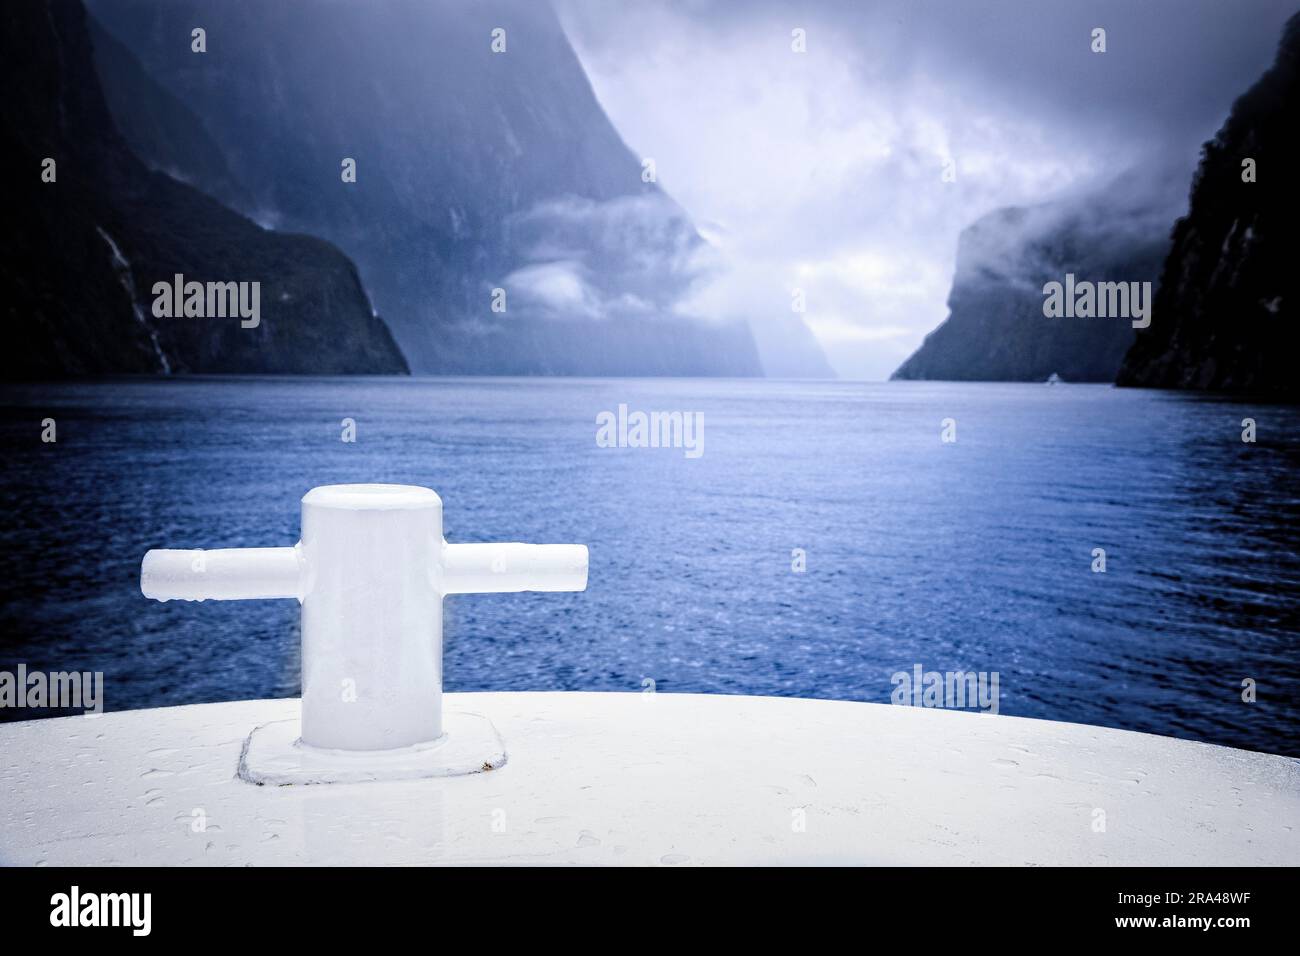 A clouded in Milford Sound in Fiordland, South Island, New Zealand. Stock Photo